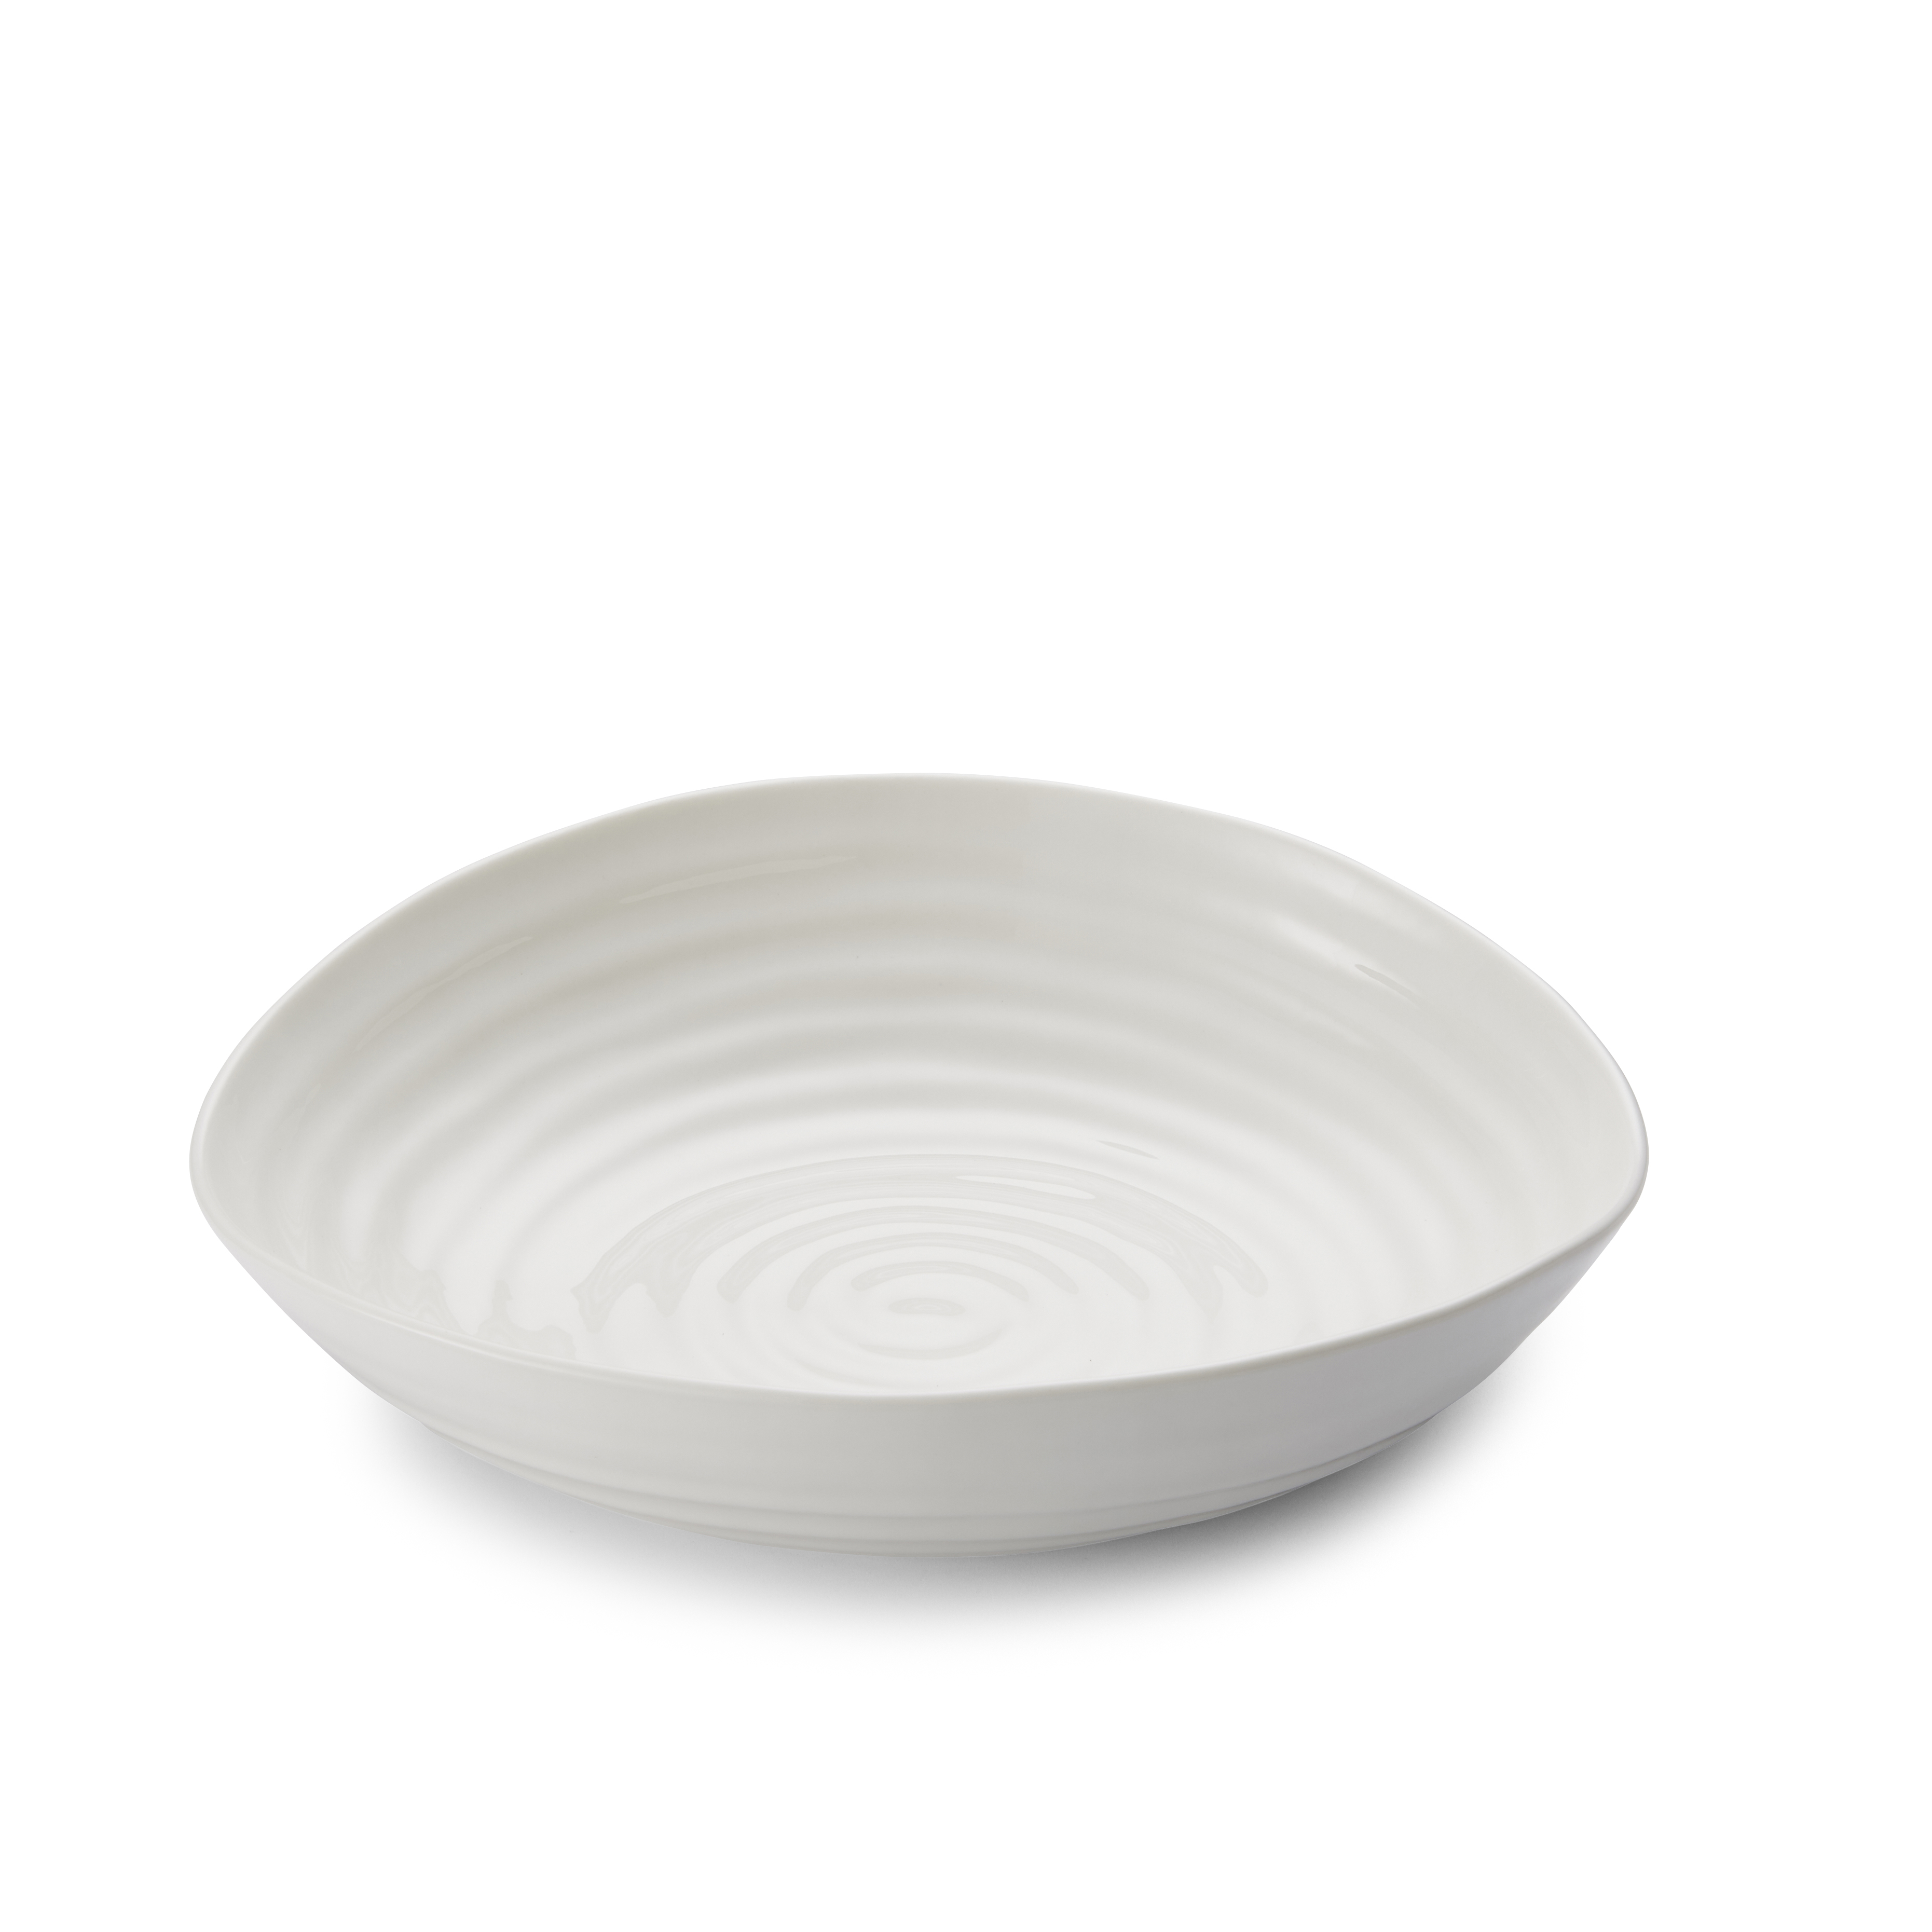 Portmeirion Sophie Conran White Set of 4 Pasta Bowls image number null